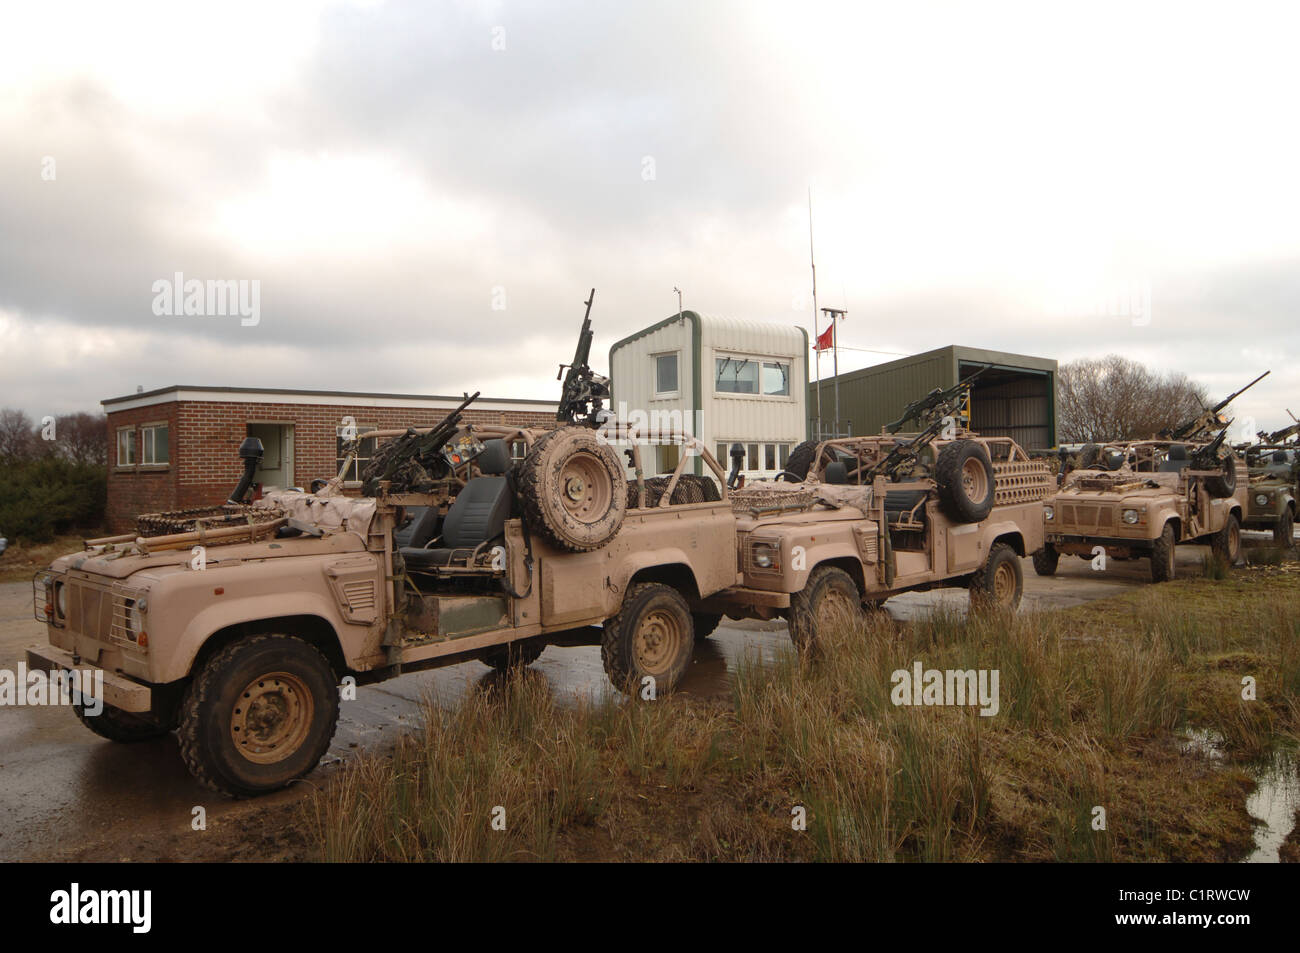 A Pink Panther Land Rover desert patrol vehicle of the British Army. Stock Photo